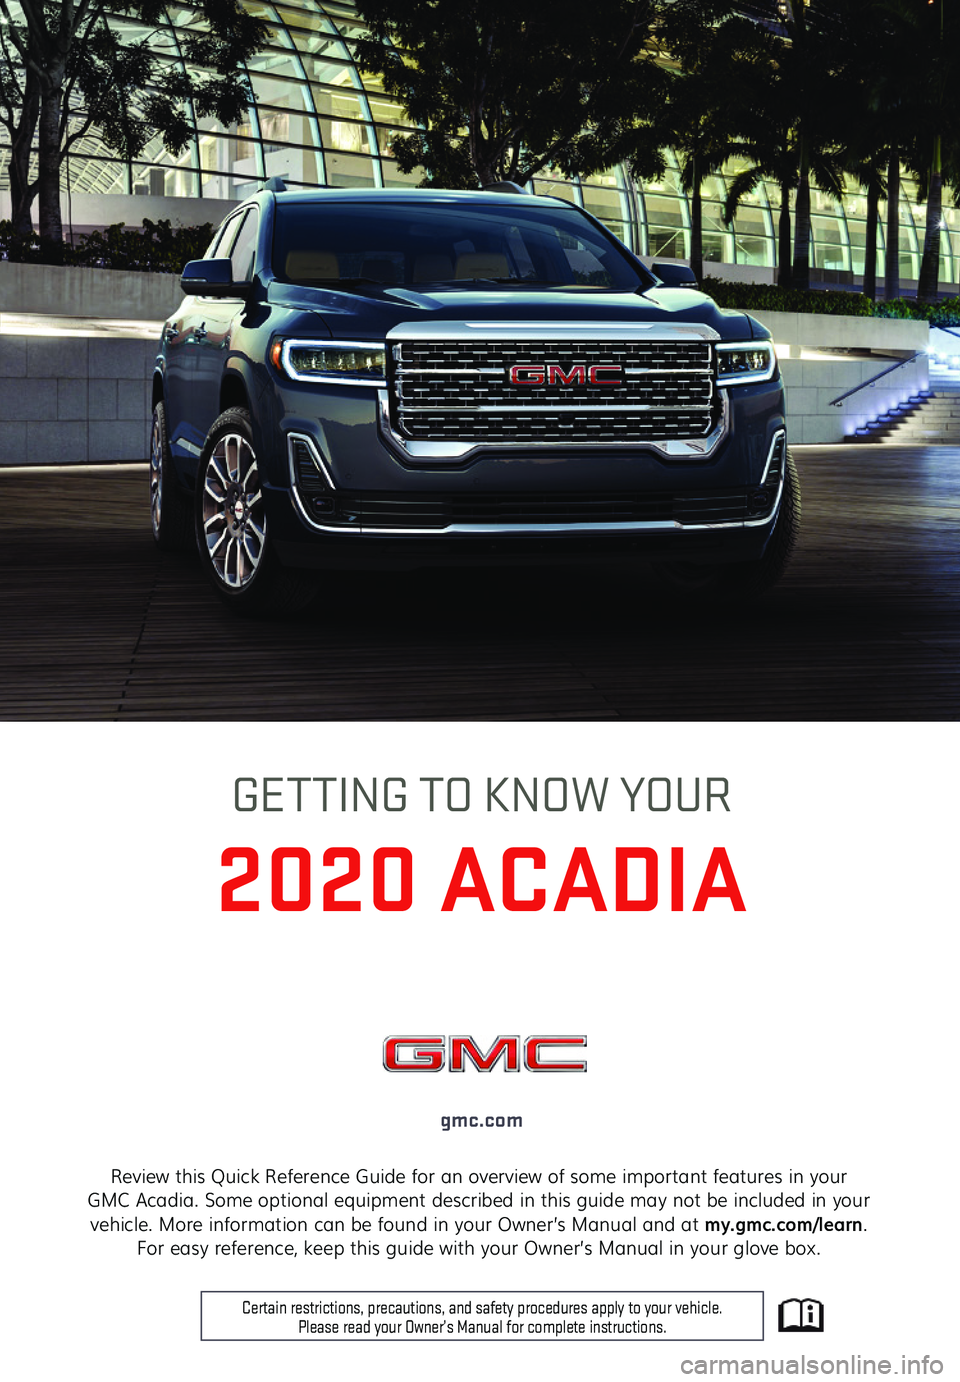 GMC ACADIA 2020  Get To Know Guide Review this Quick Reference Guide for an overview of some important features in your GMC Acadia. Some optional equipment described in this guide may not be included in your vehicle. More information c